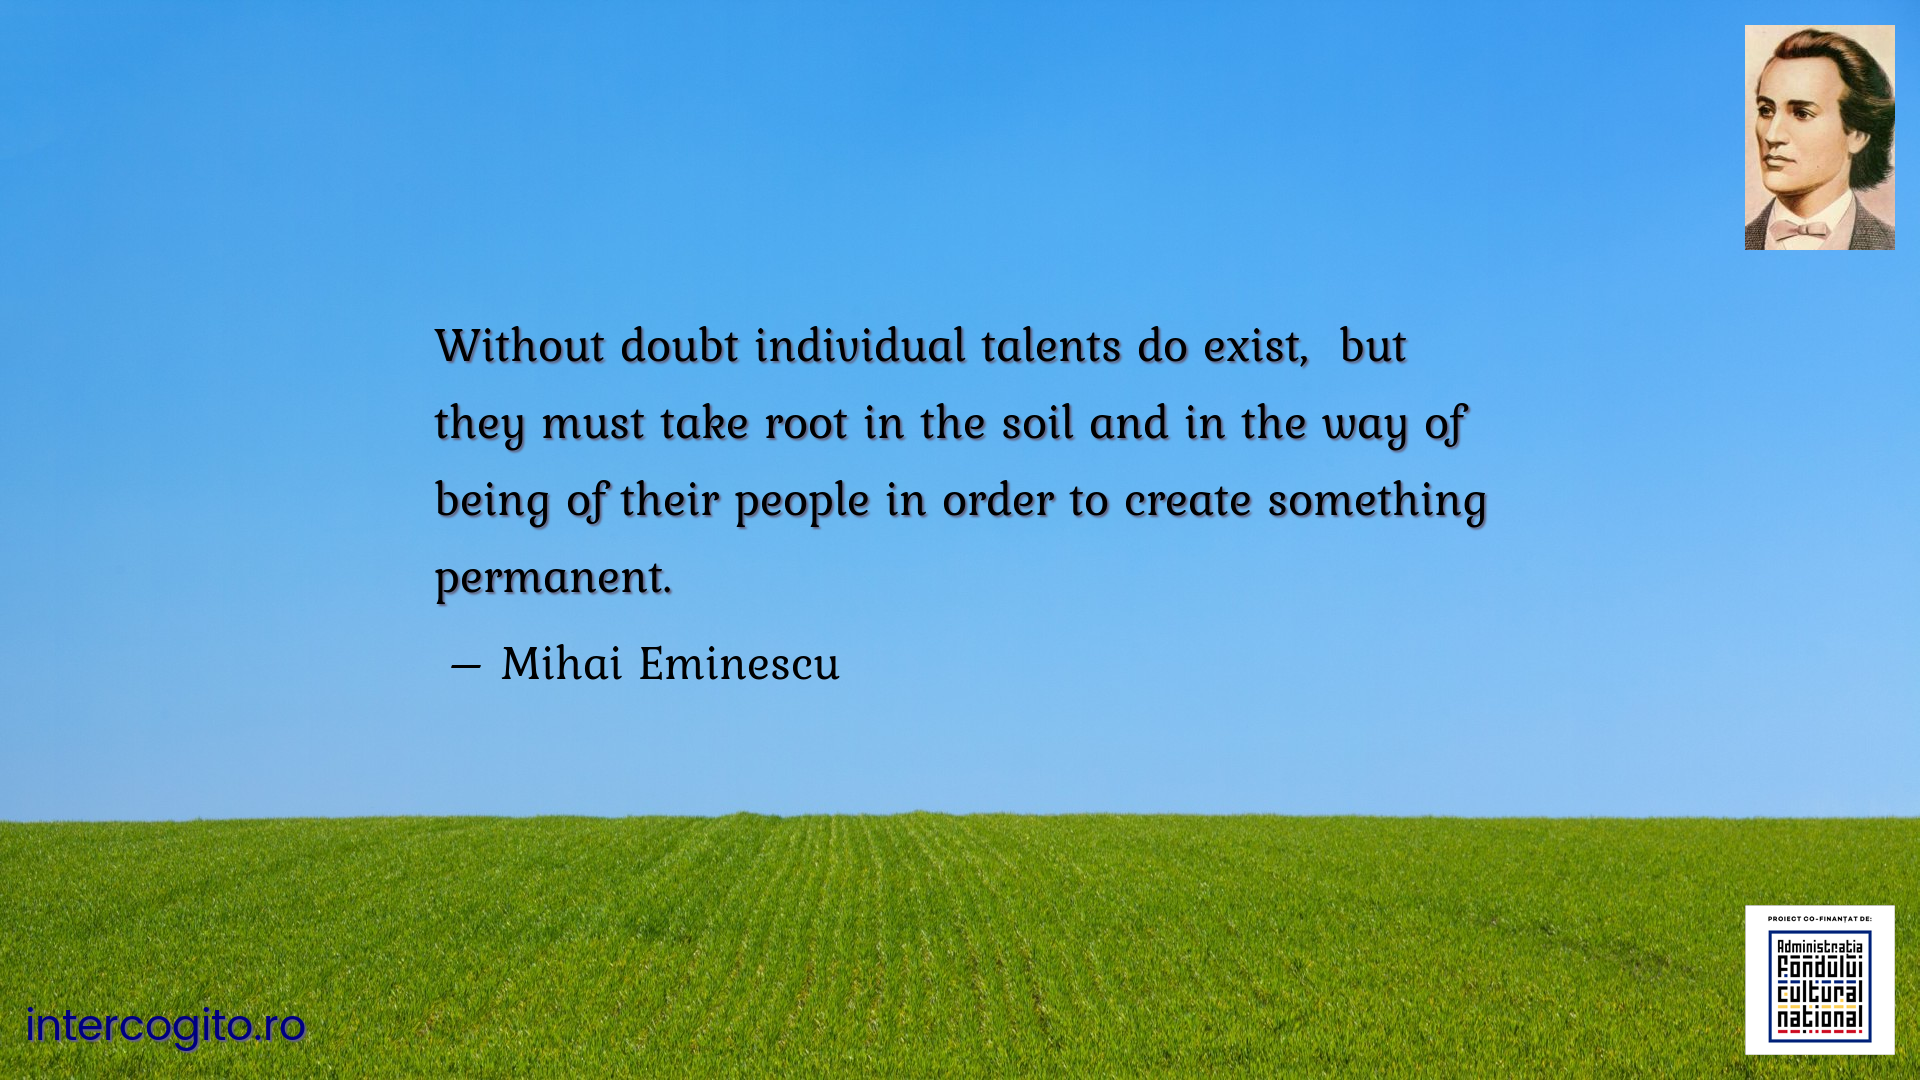 Without doubt individual talents do exist,  but they must take root in the soil and in the way of being of their people in order to create something permanent.